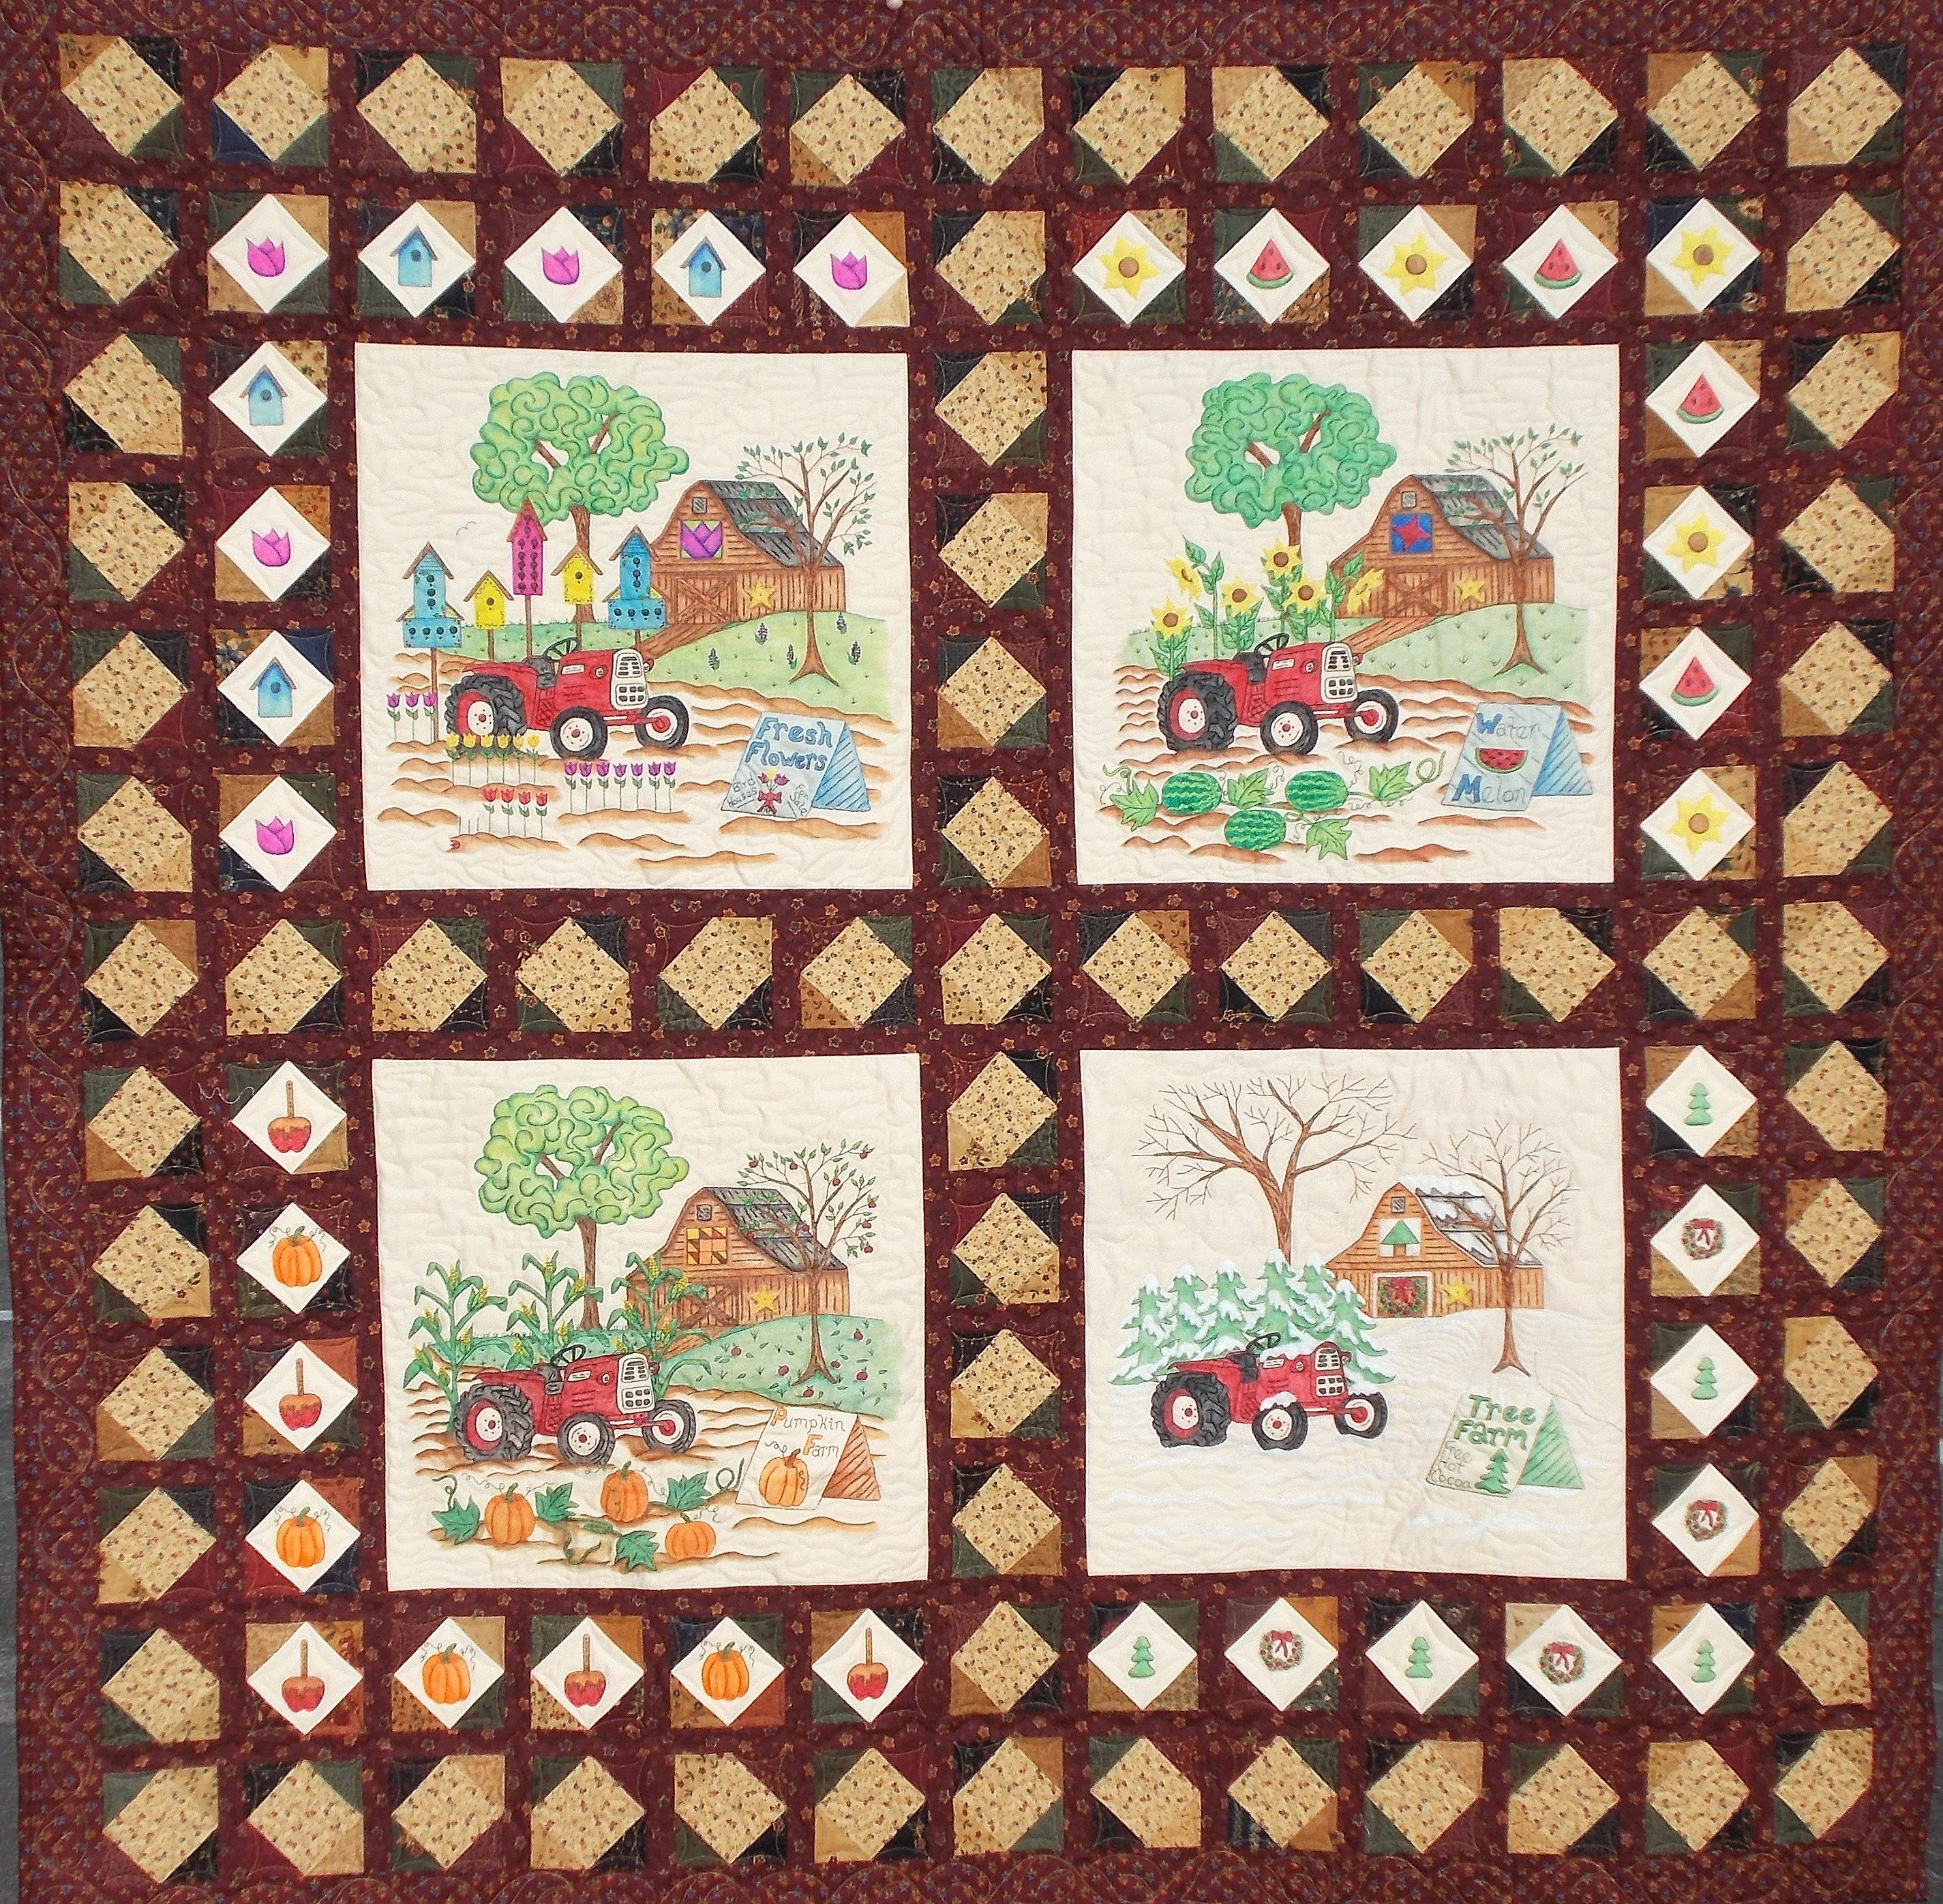 Embroidery Quilt Patterns Seasons On The Farm Barn Quilt Pattern Color Pencil On Fabric Technique Hand Embroidery Quilt Patterns